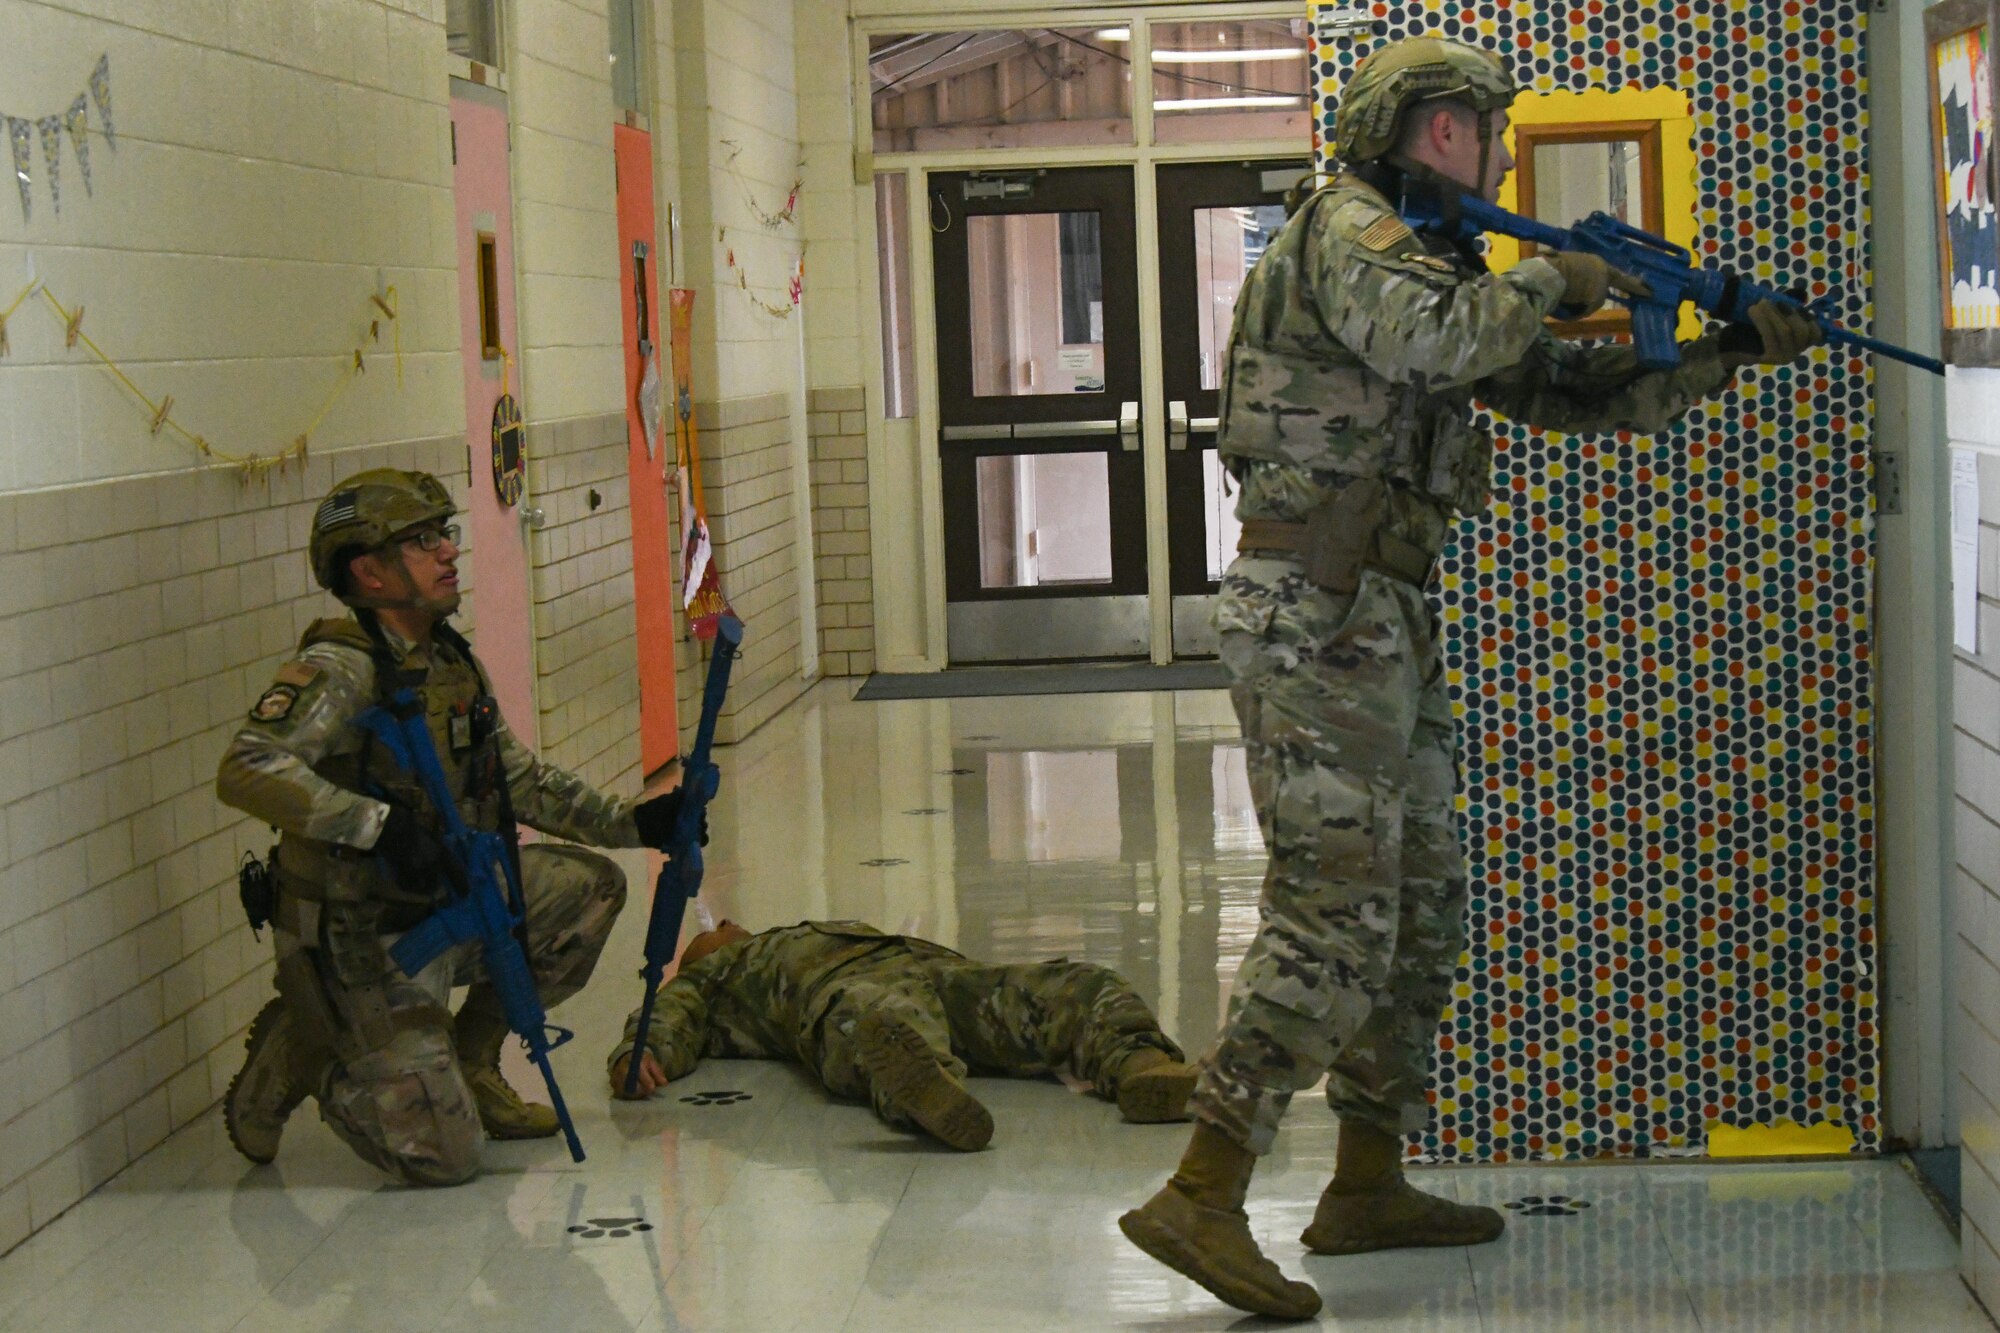 Staff Sgt. Andrew Luna and Staff Sgt. Dakota Reinsch, 97th Security Forces Squadron patrolmen, clear a room during an active shooter exercise at Altus Air Force Base, Oklahoma, Aug. 10, 2022. Exercises like this are held to test preparedness and response to a high threat situation. (U.S. Air Force photo by Airman 1st Class Miyah Gray)